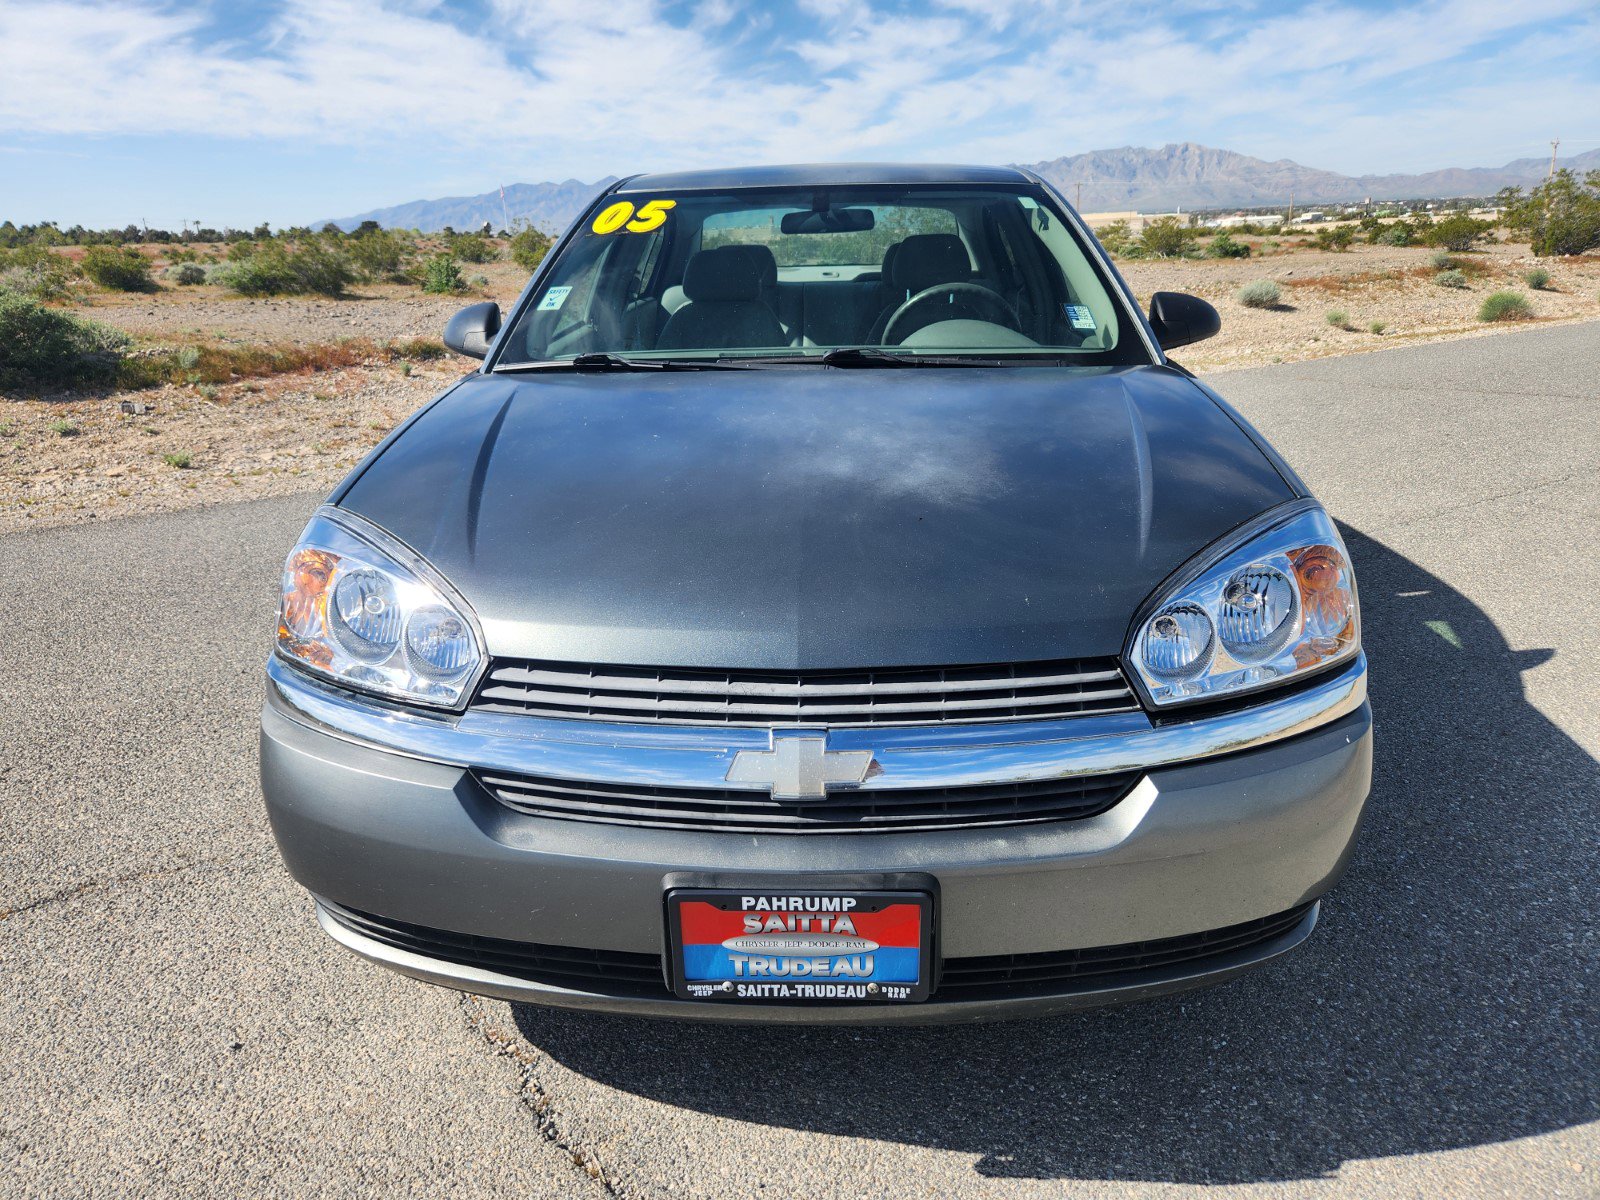 Used 2005 Chevrolet Malibu LS with VIN 1G1ZT52835F108463 for sale in Pahrump, NV